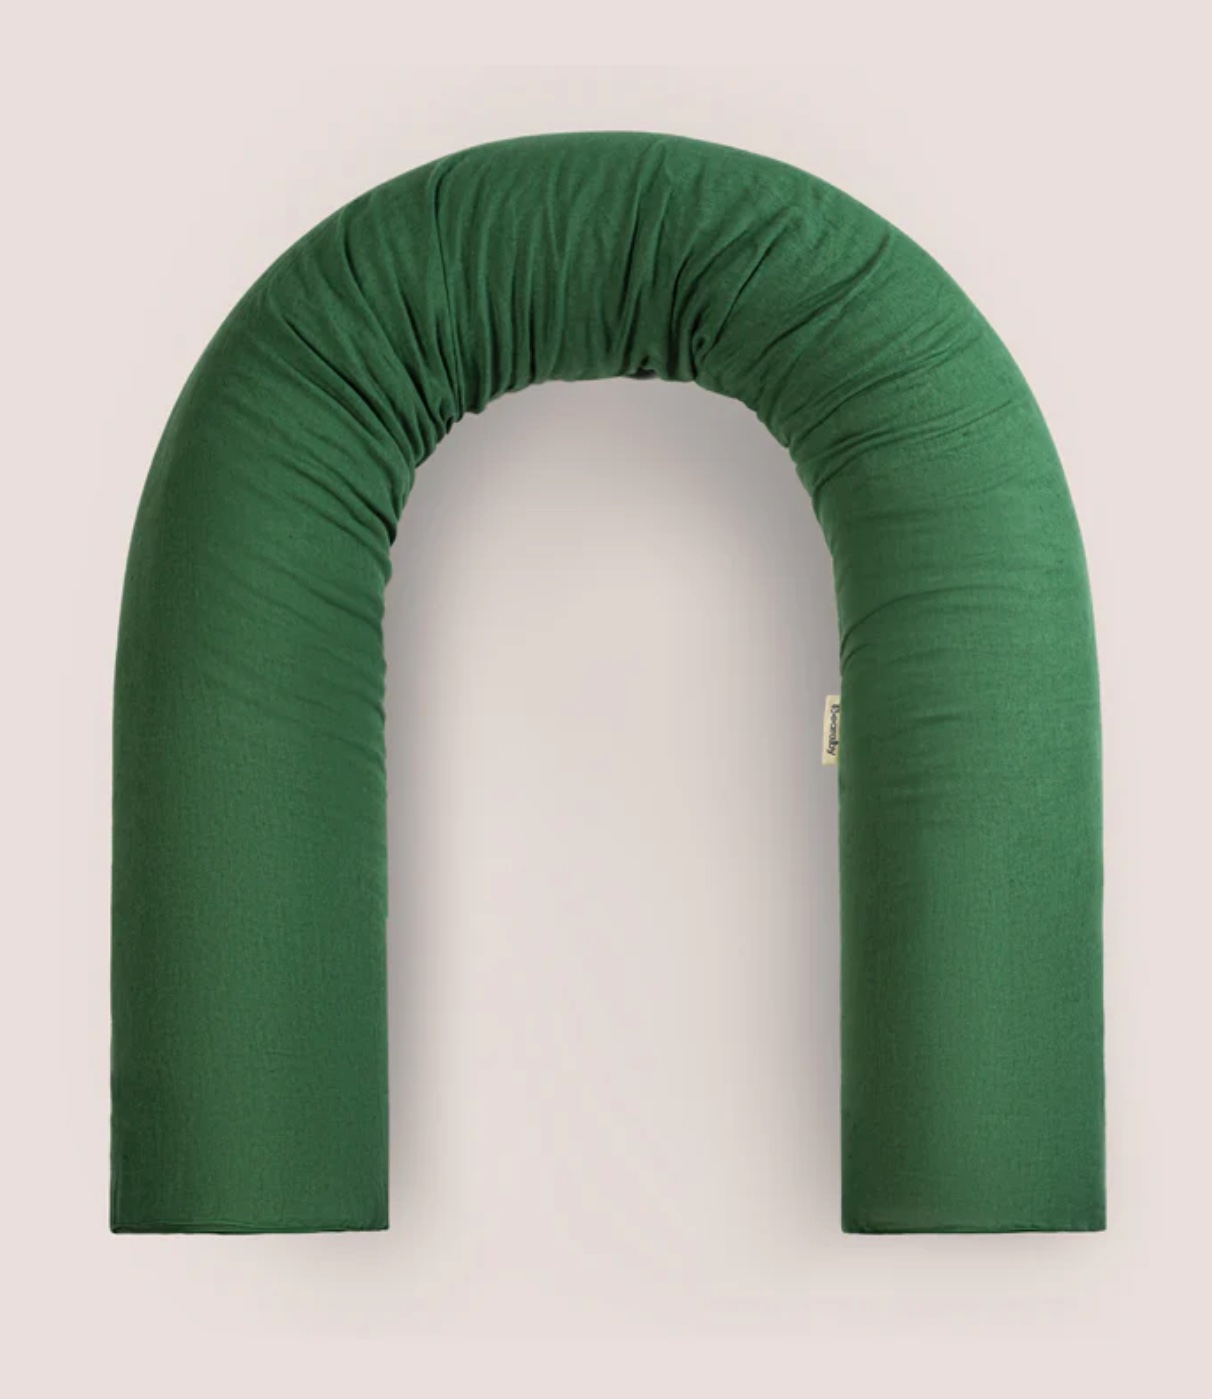 The Bearaby pillow in a green cover.